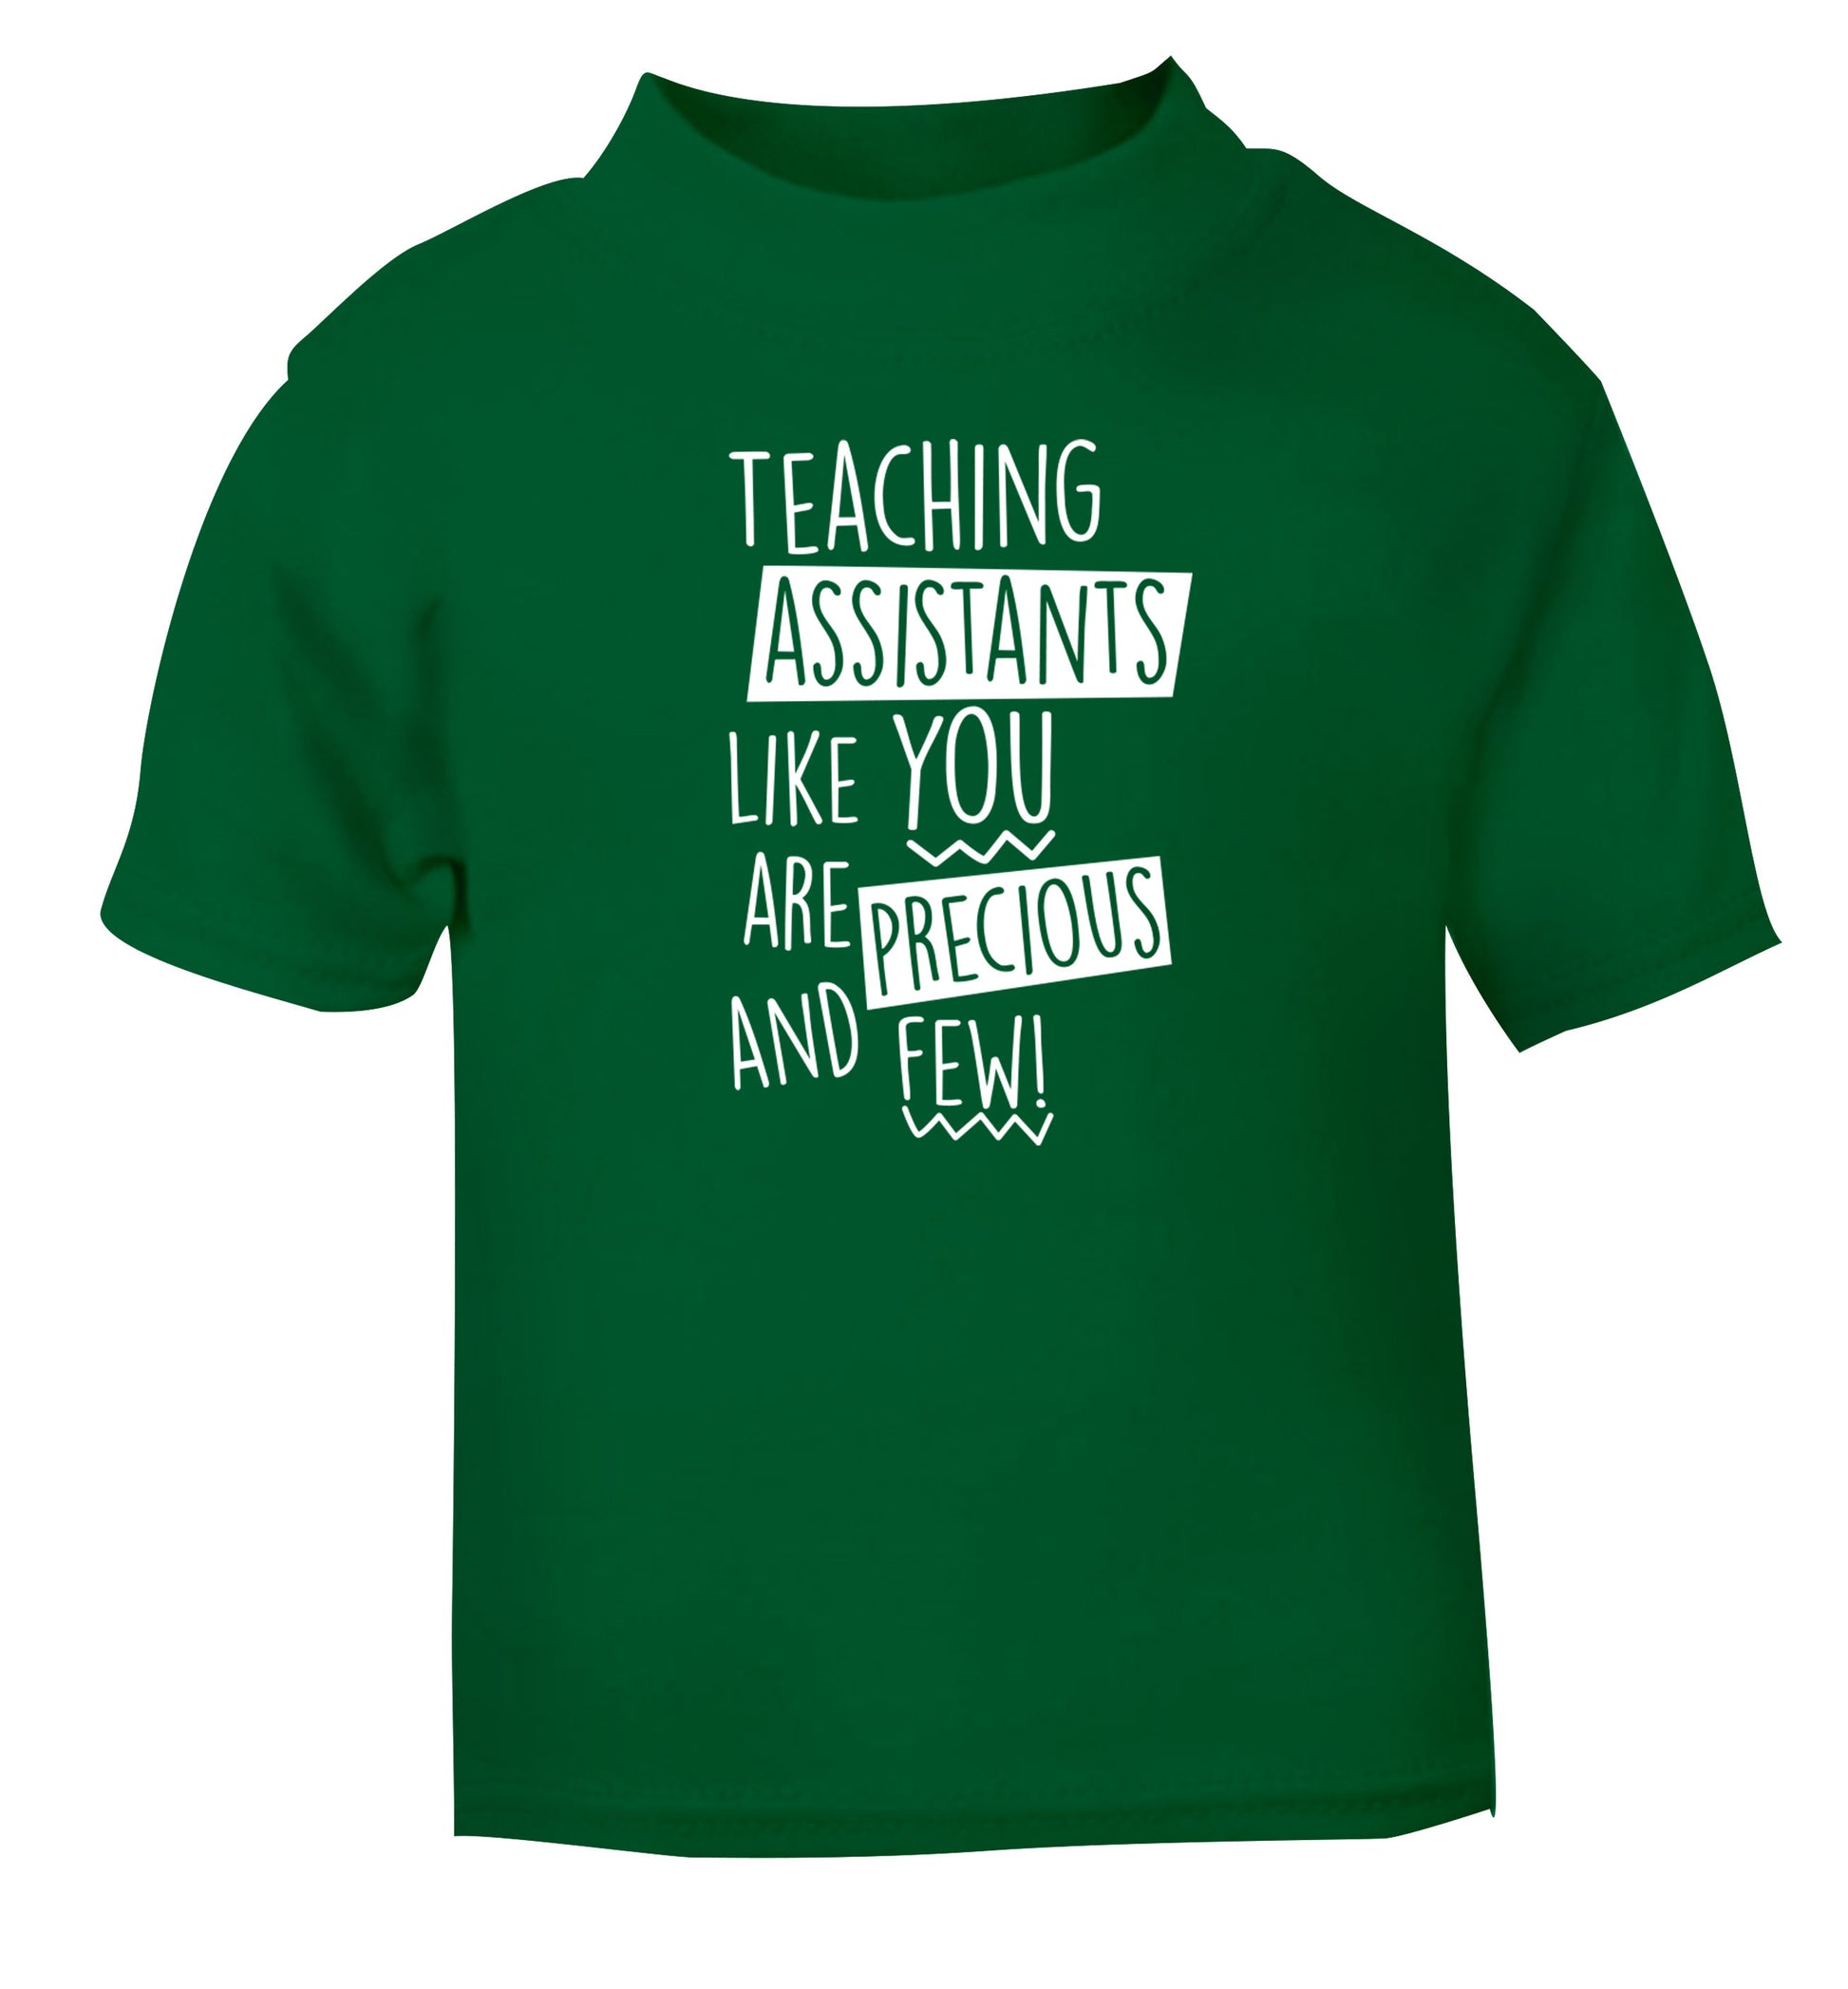 Teaching assistants like you are previous and few! green Baby Toddler Tshirt 2 Years